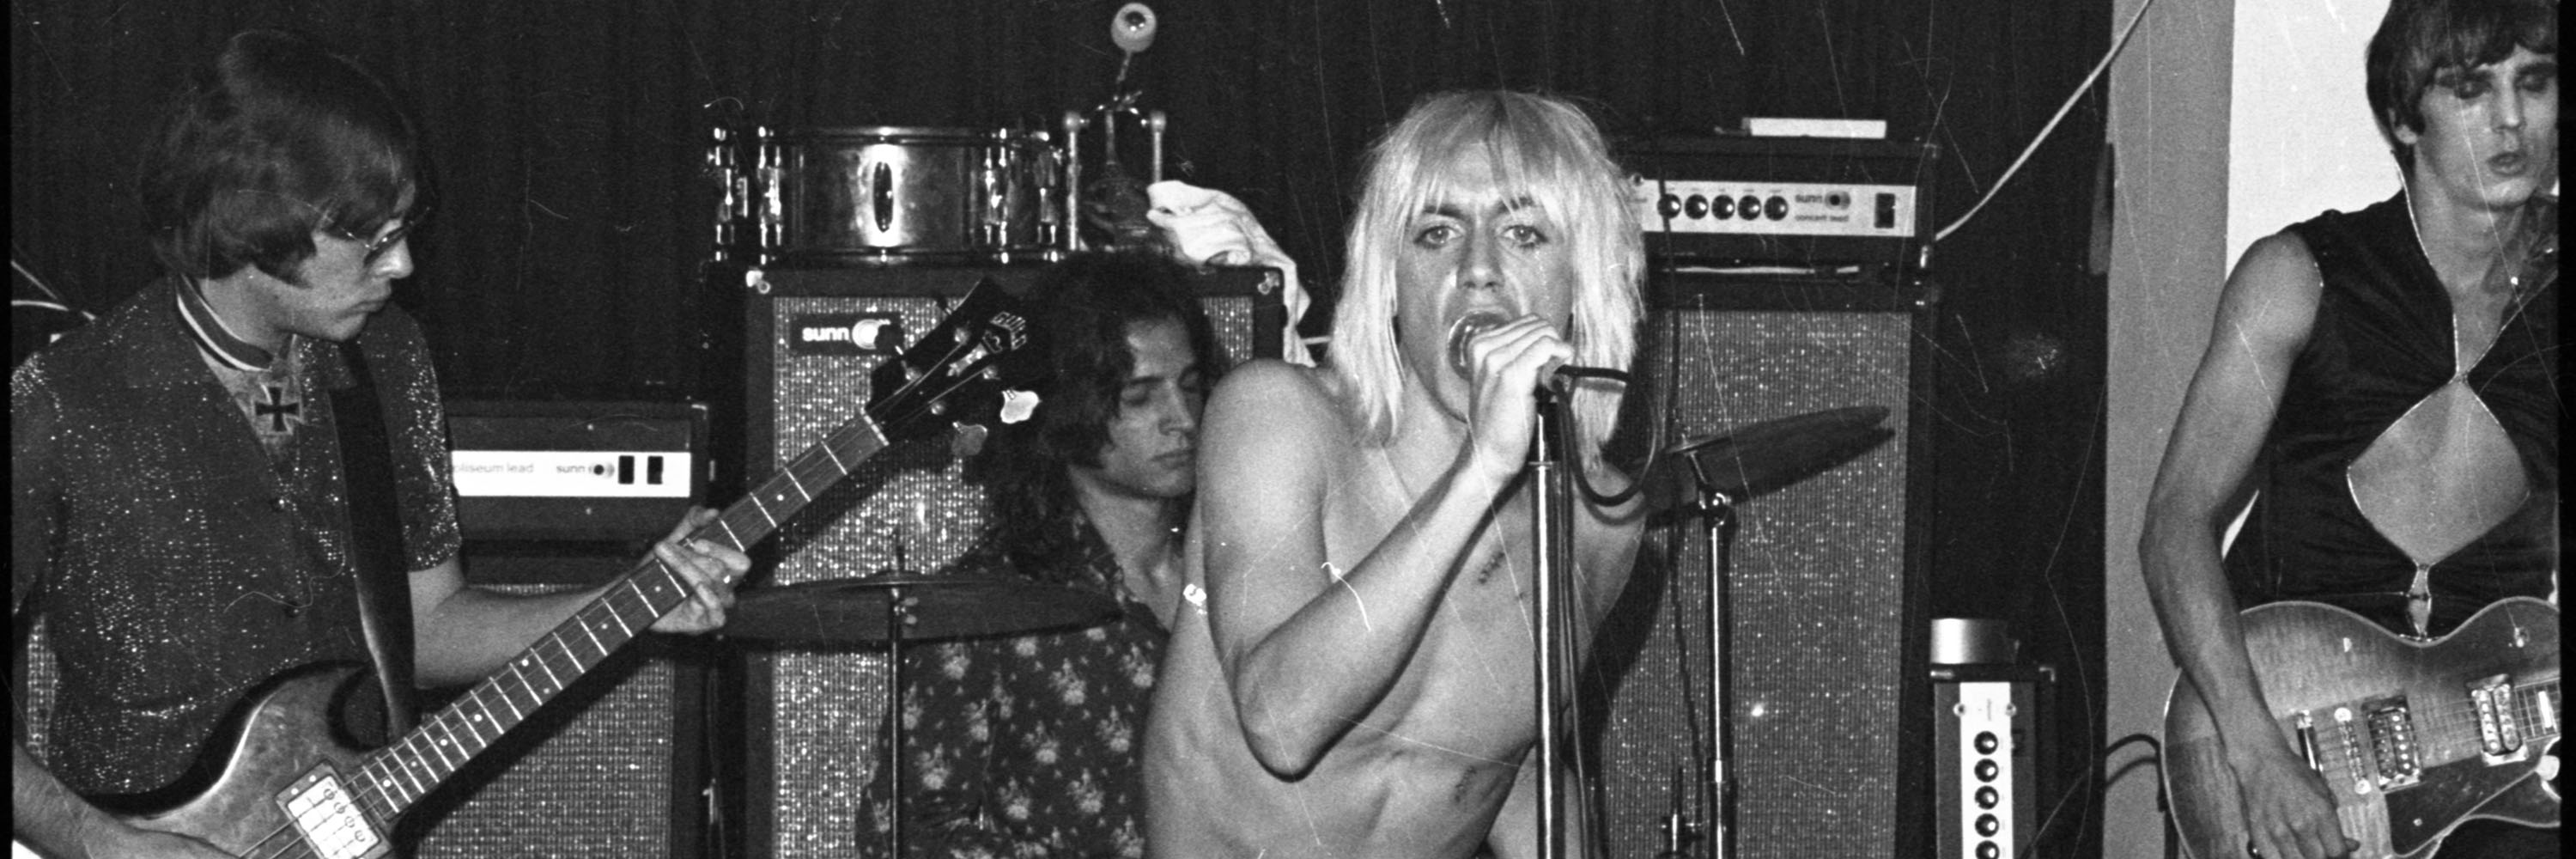 Rock and Roll band The Stooges, with two members looking away playing guitars, and singer Iggy Pop singing into a microphone and staring into the camera